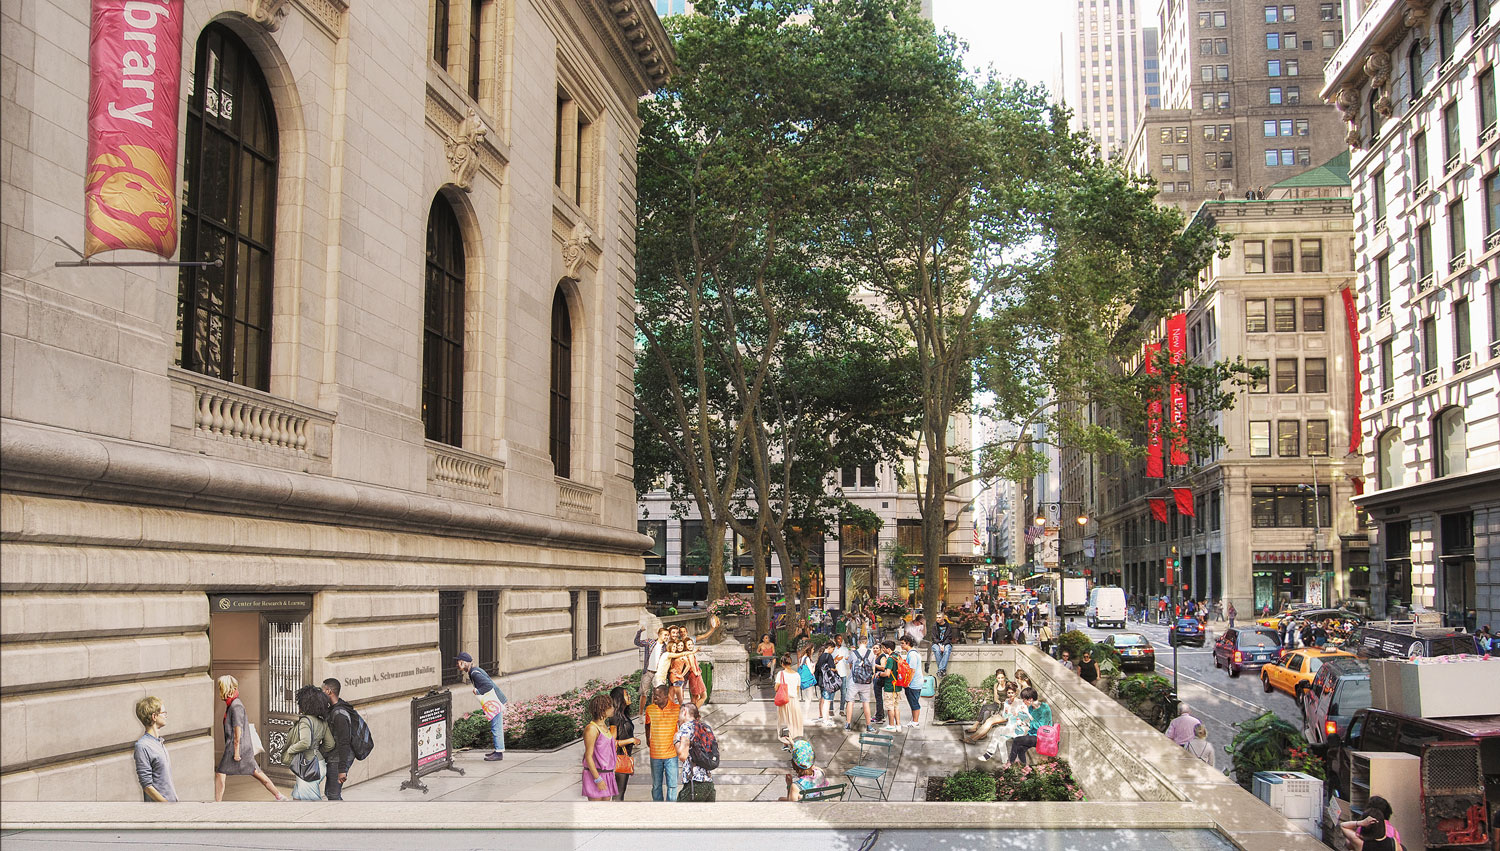 A rendering of the new 40th Street Entrance to the Stephen A. Schwarzman Building